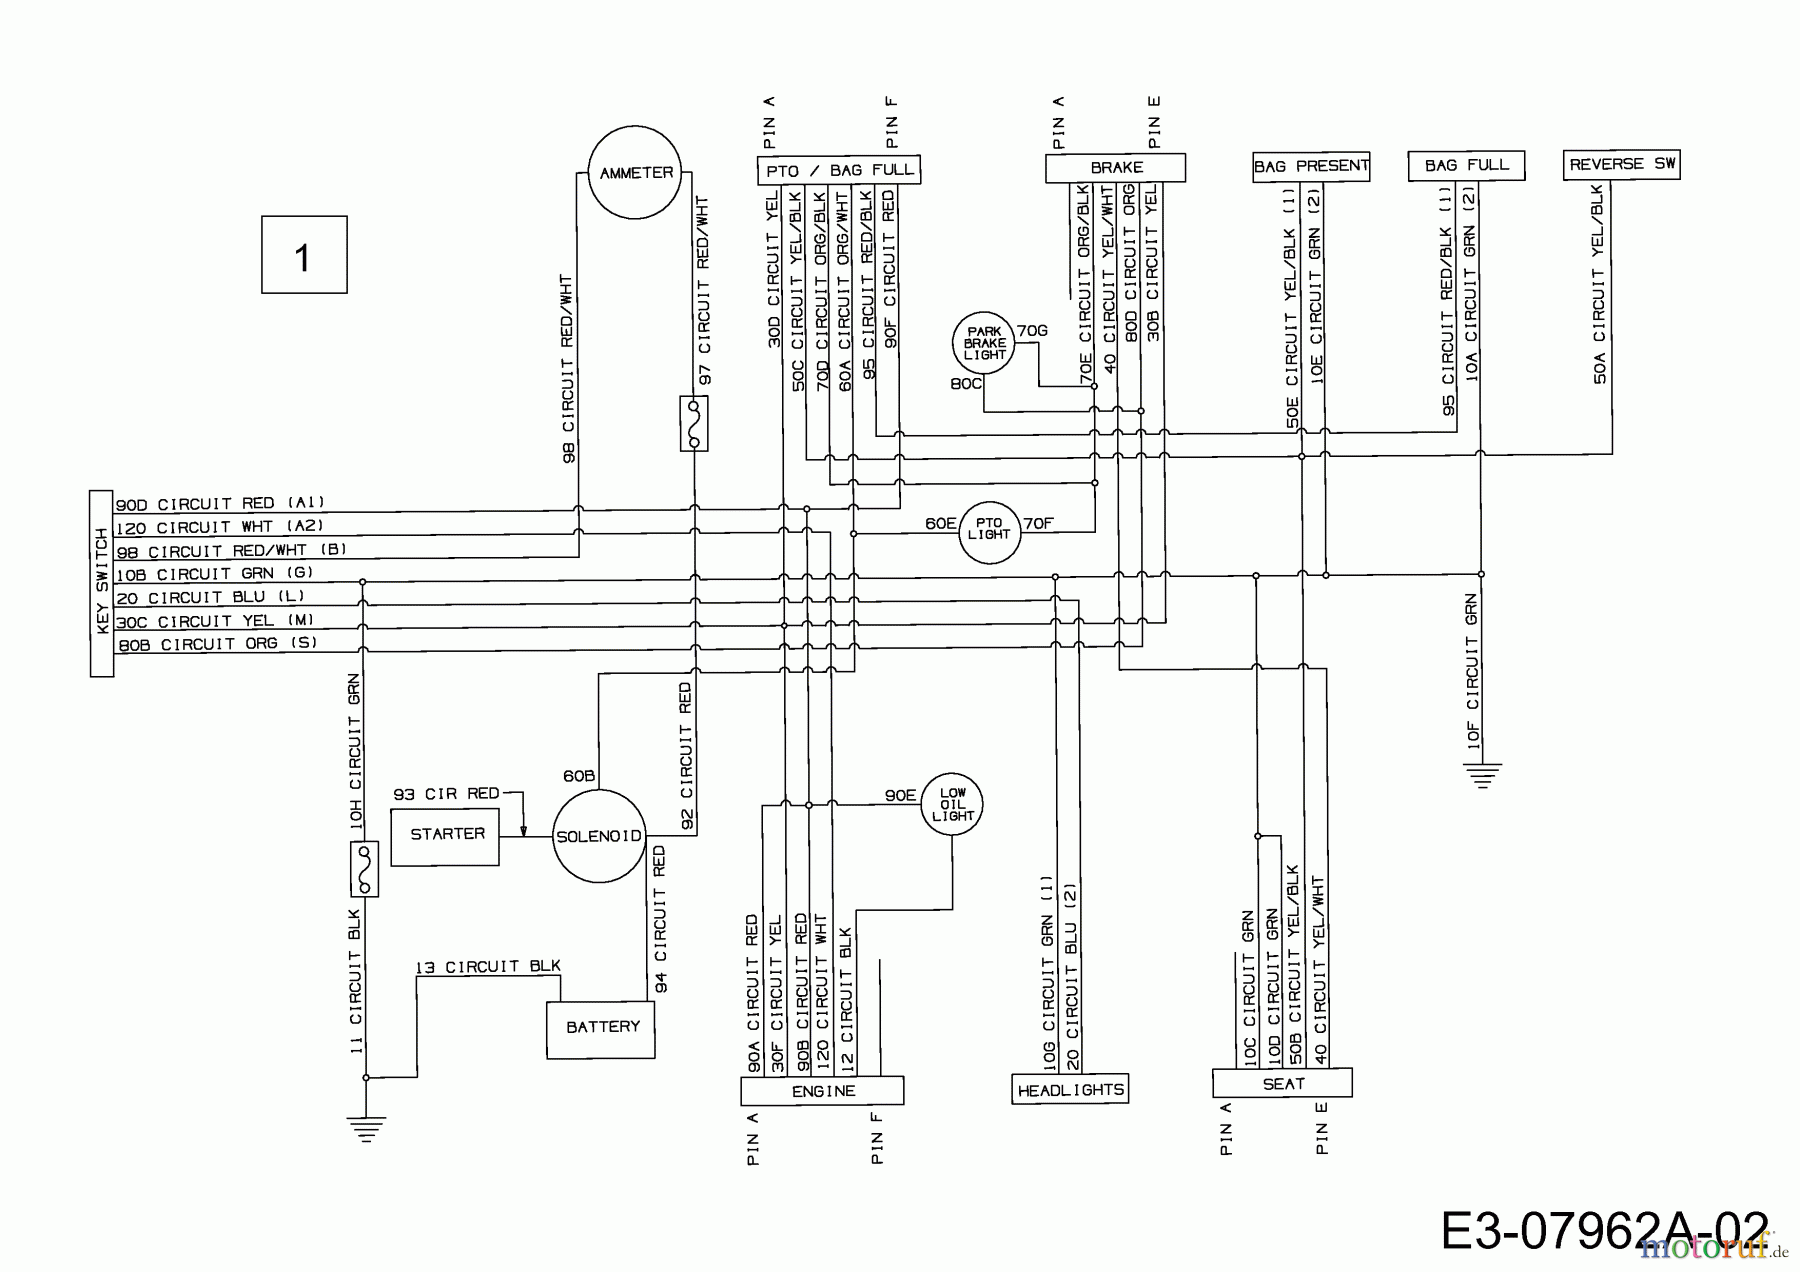  Edt Lawn tractors EDT 135-92 13AA509E610  (2002) Wiring diagram